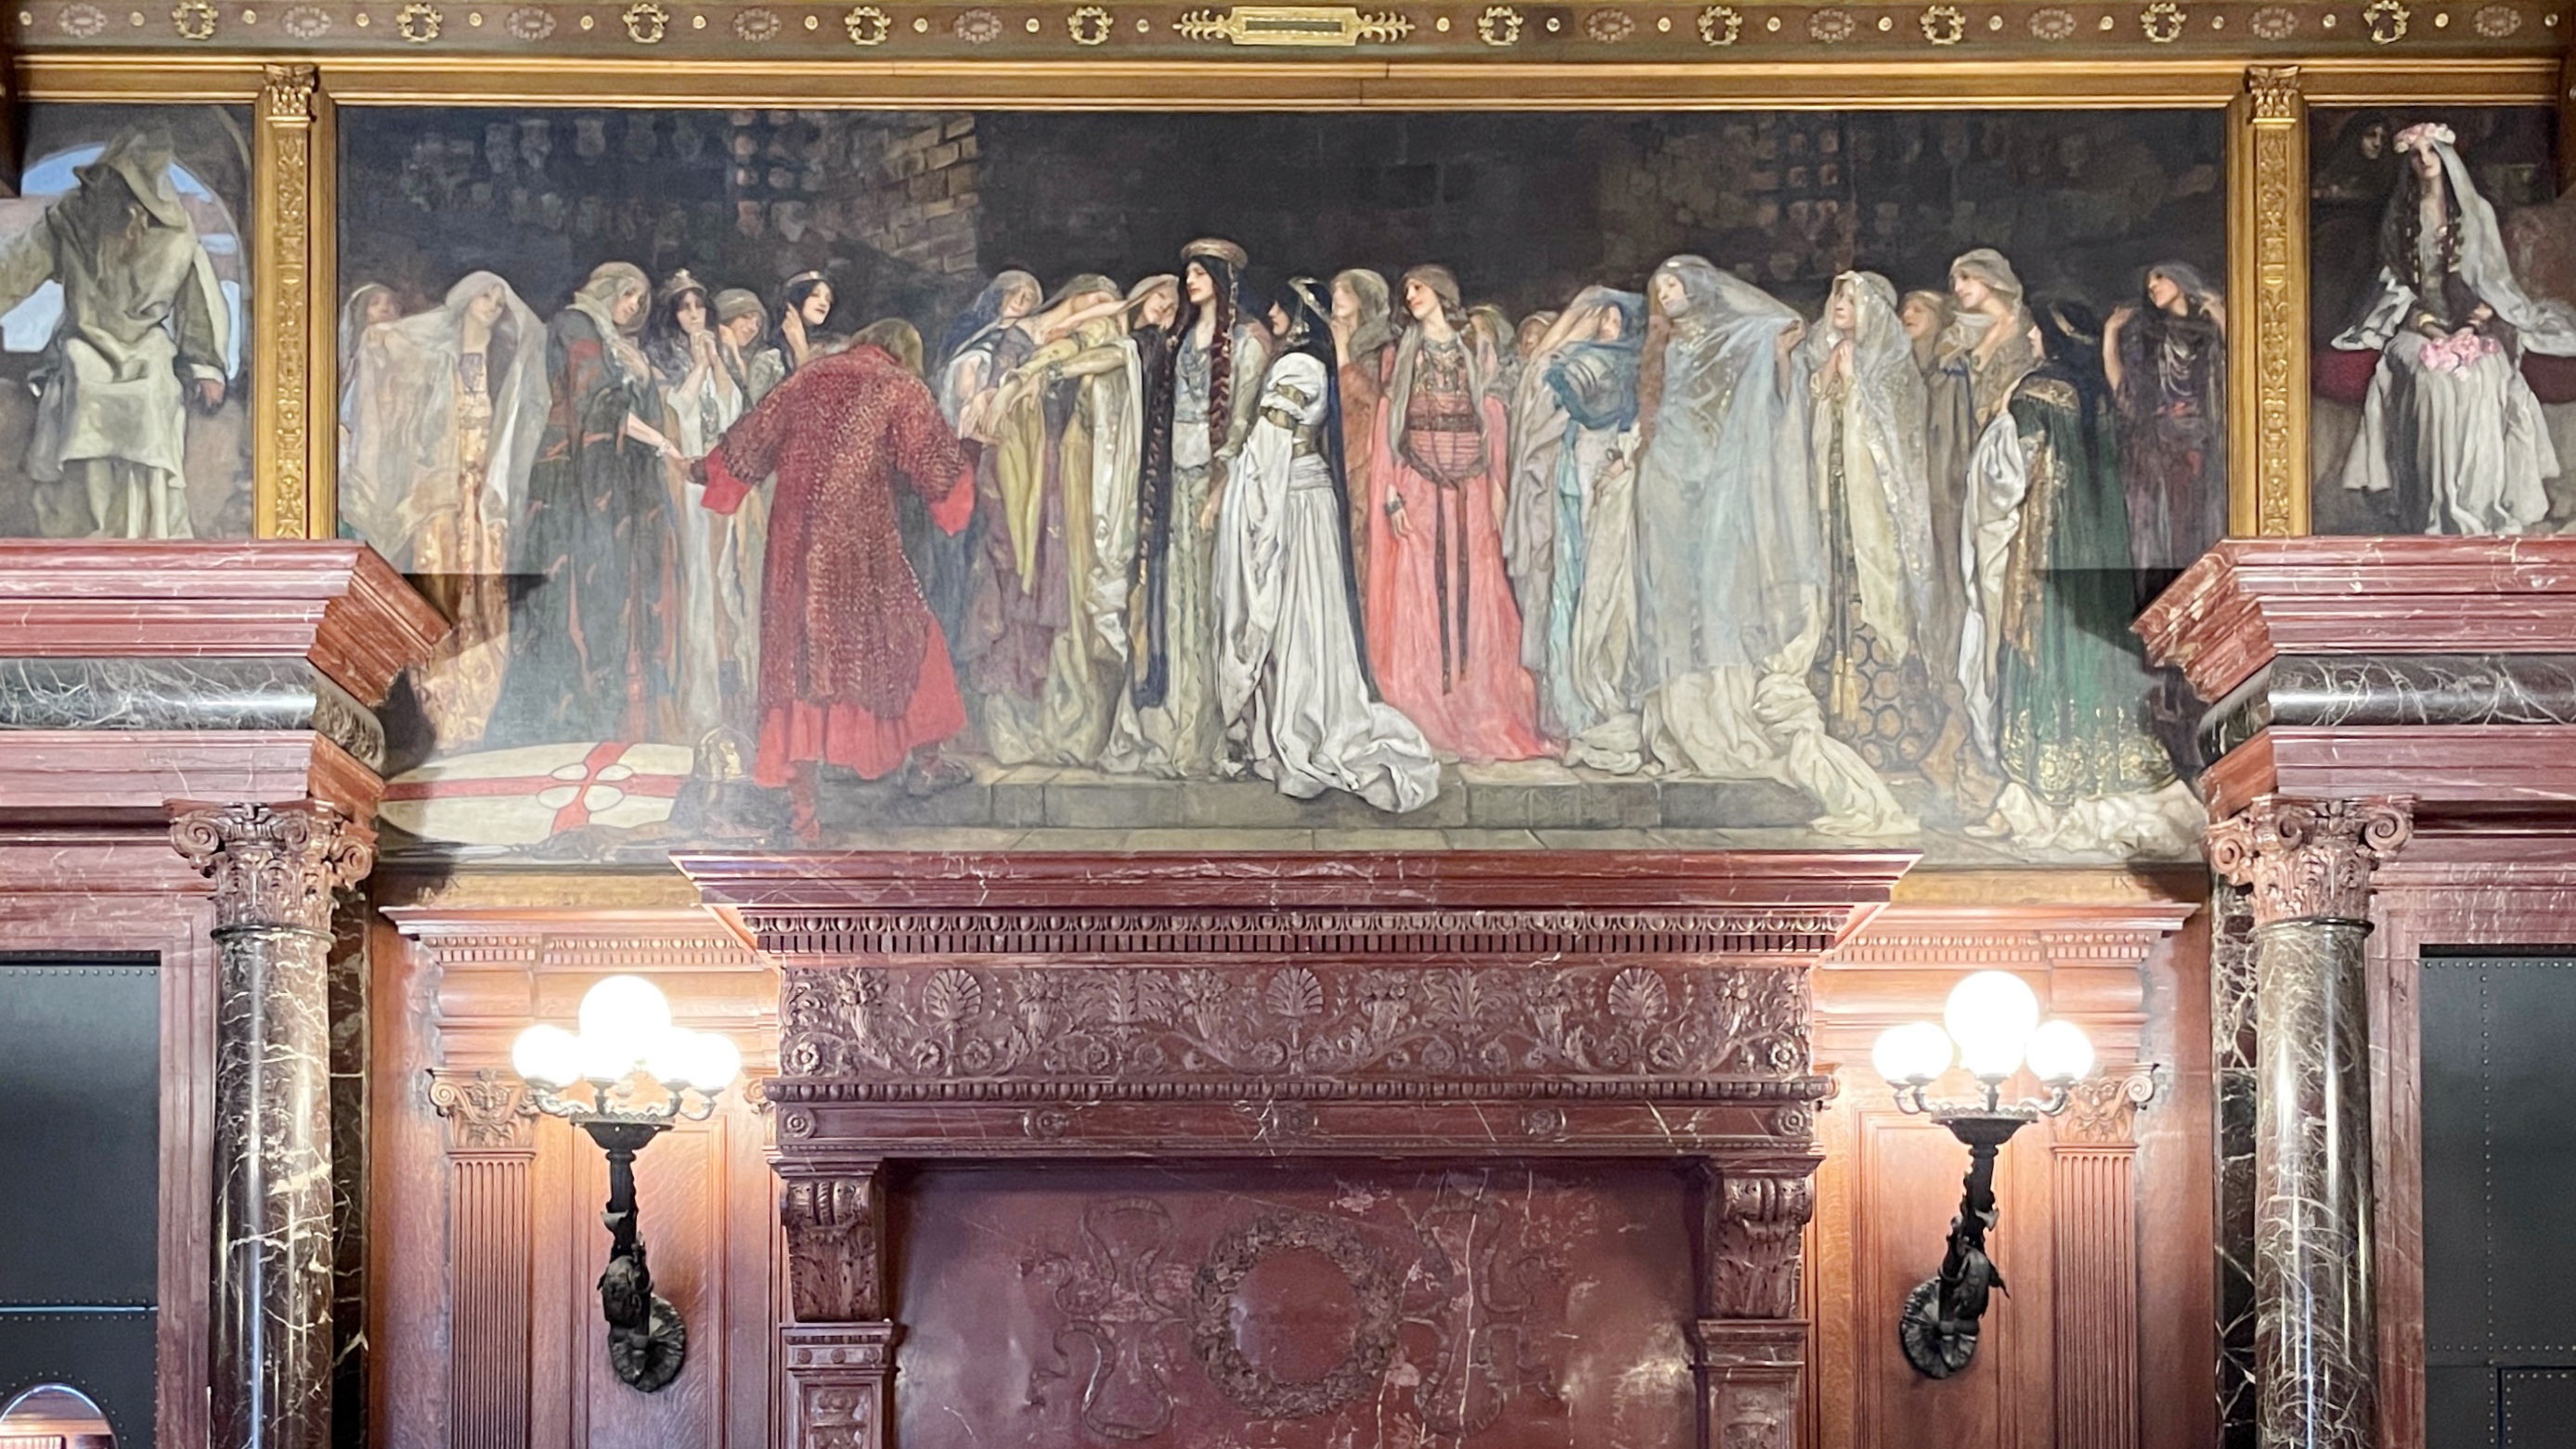 Painted scene that appears in the Boston Public Library.